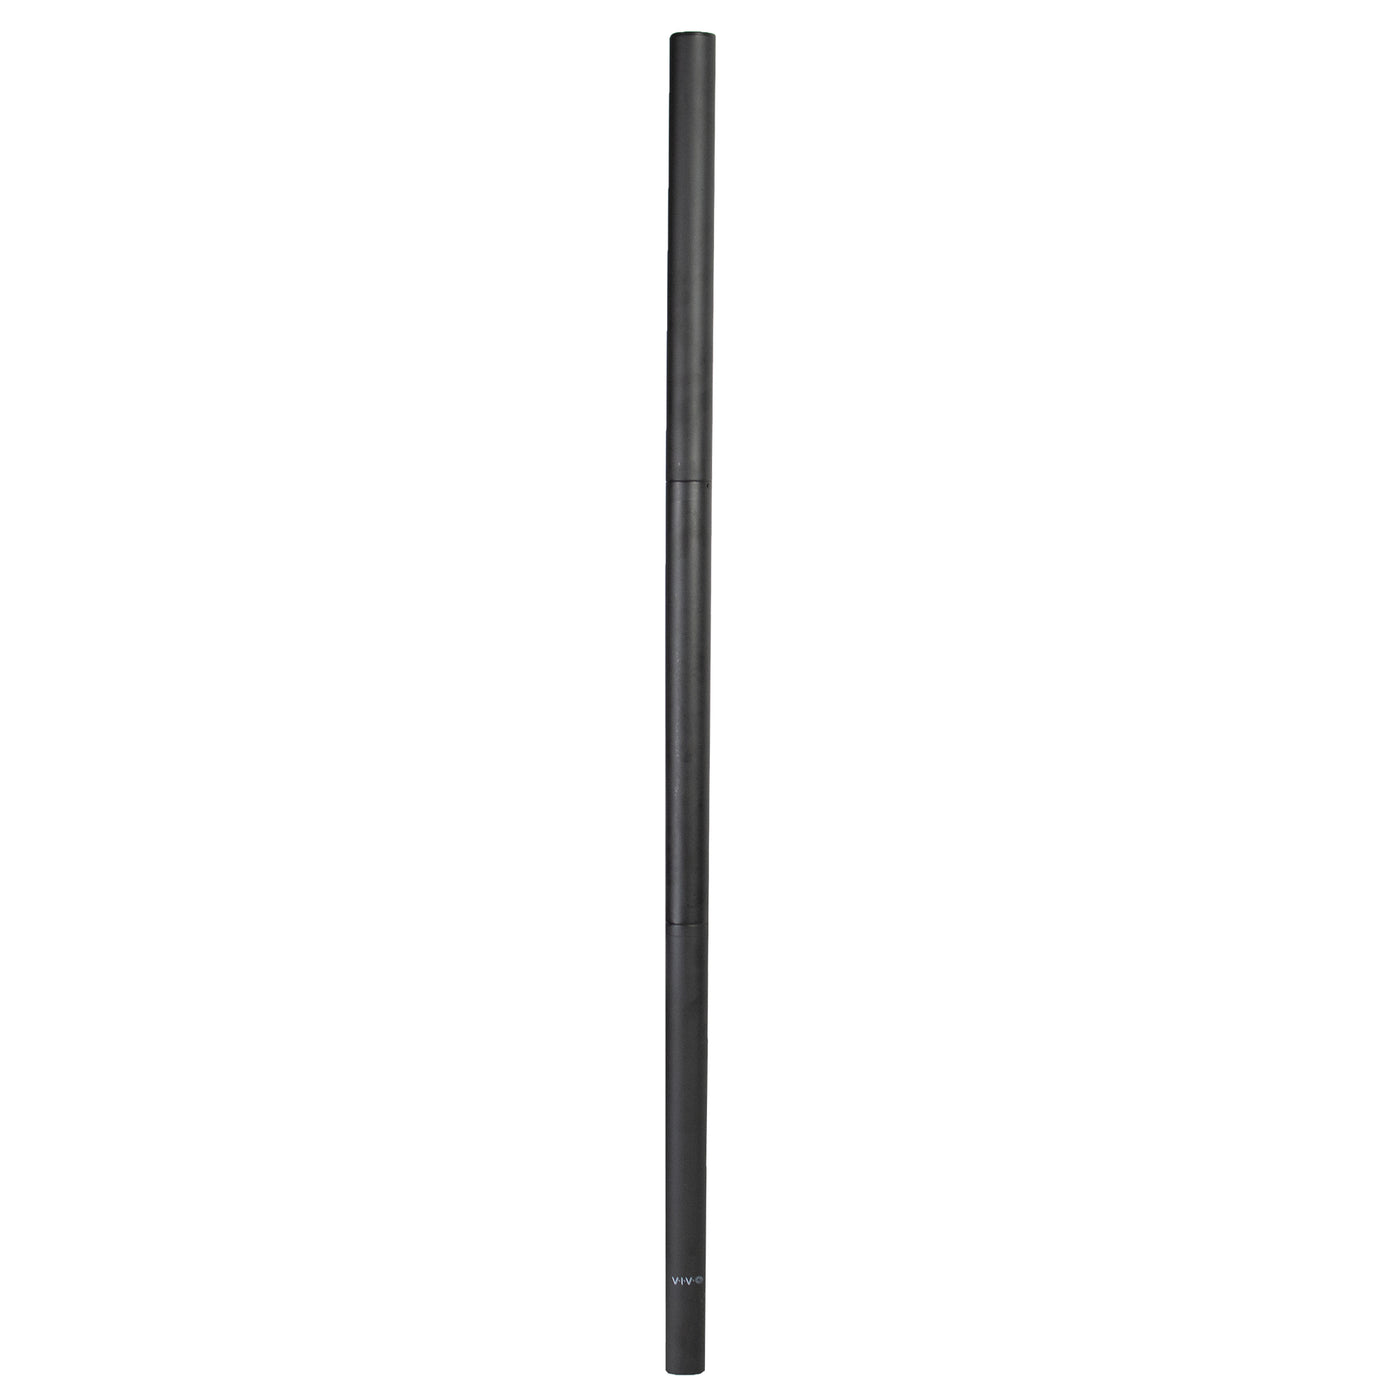 Extra tall black pole for mounting from VIVO.